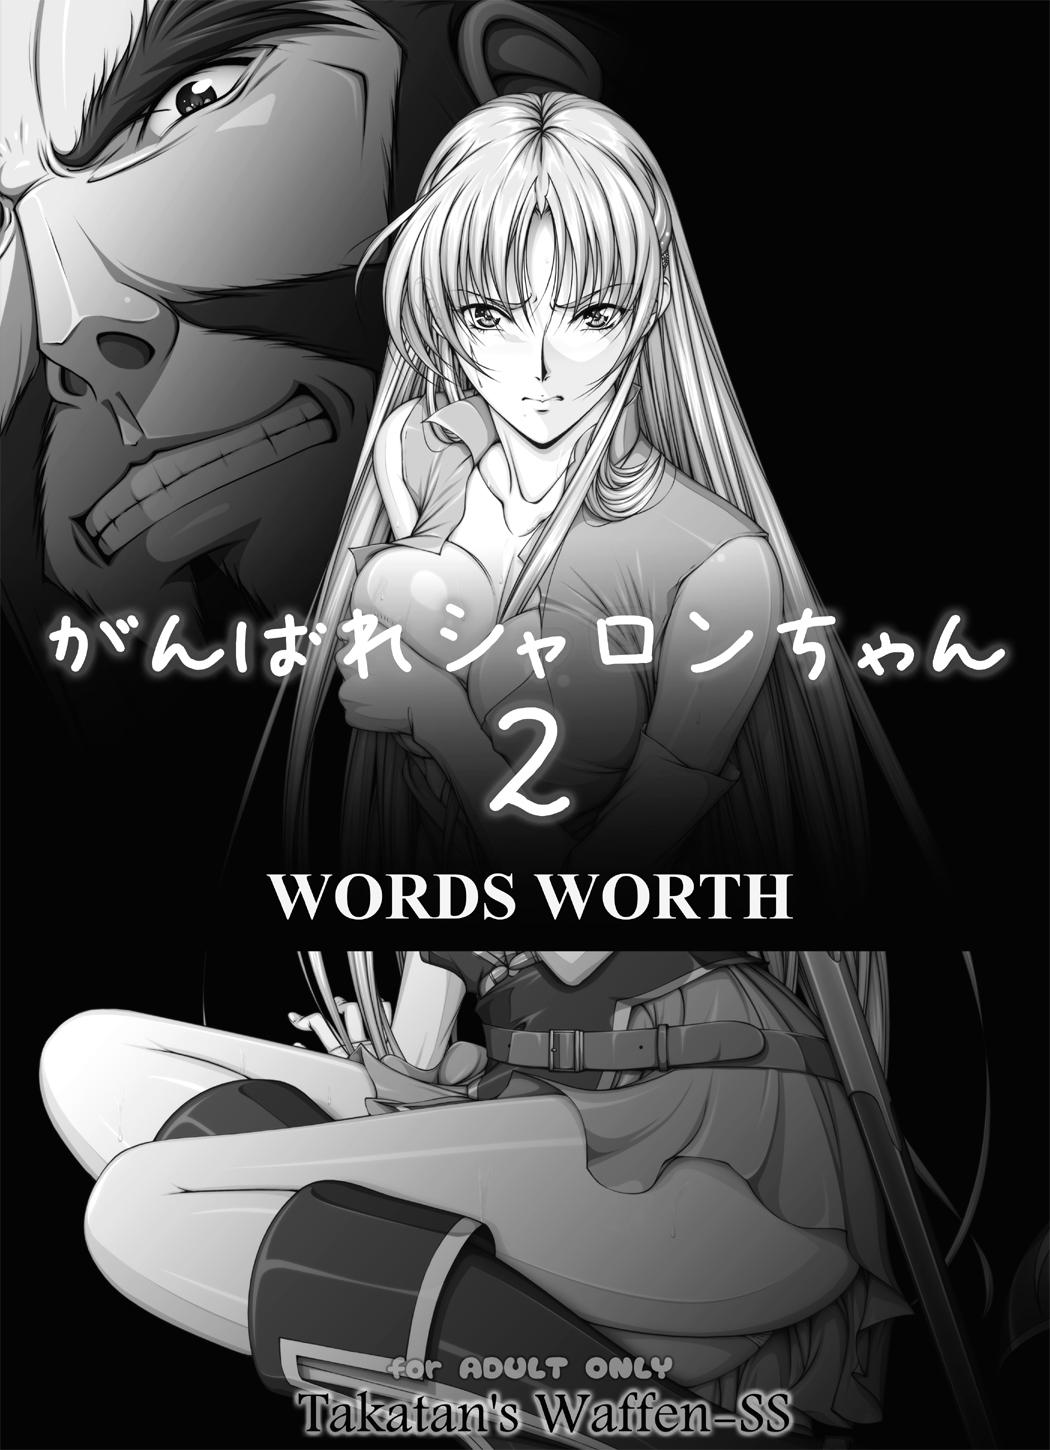 Gostosa [Takatan's Waffen-SS] Fight, Sharon! 2 [Deluxe Edition] (Words Worth) +omake - Words worth Plumper - Page 8